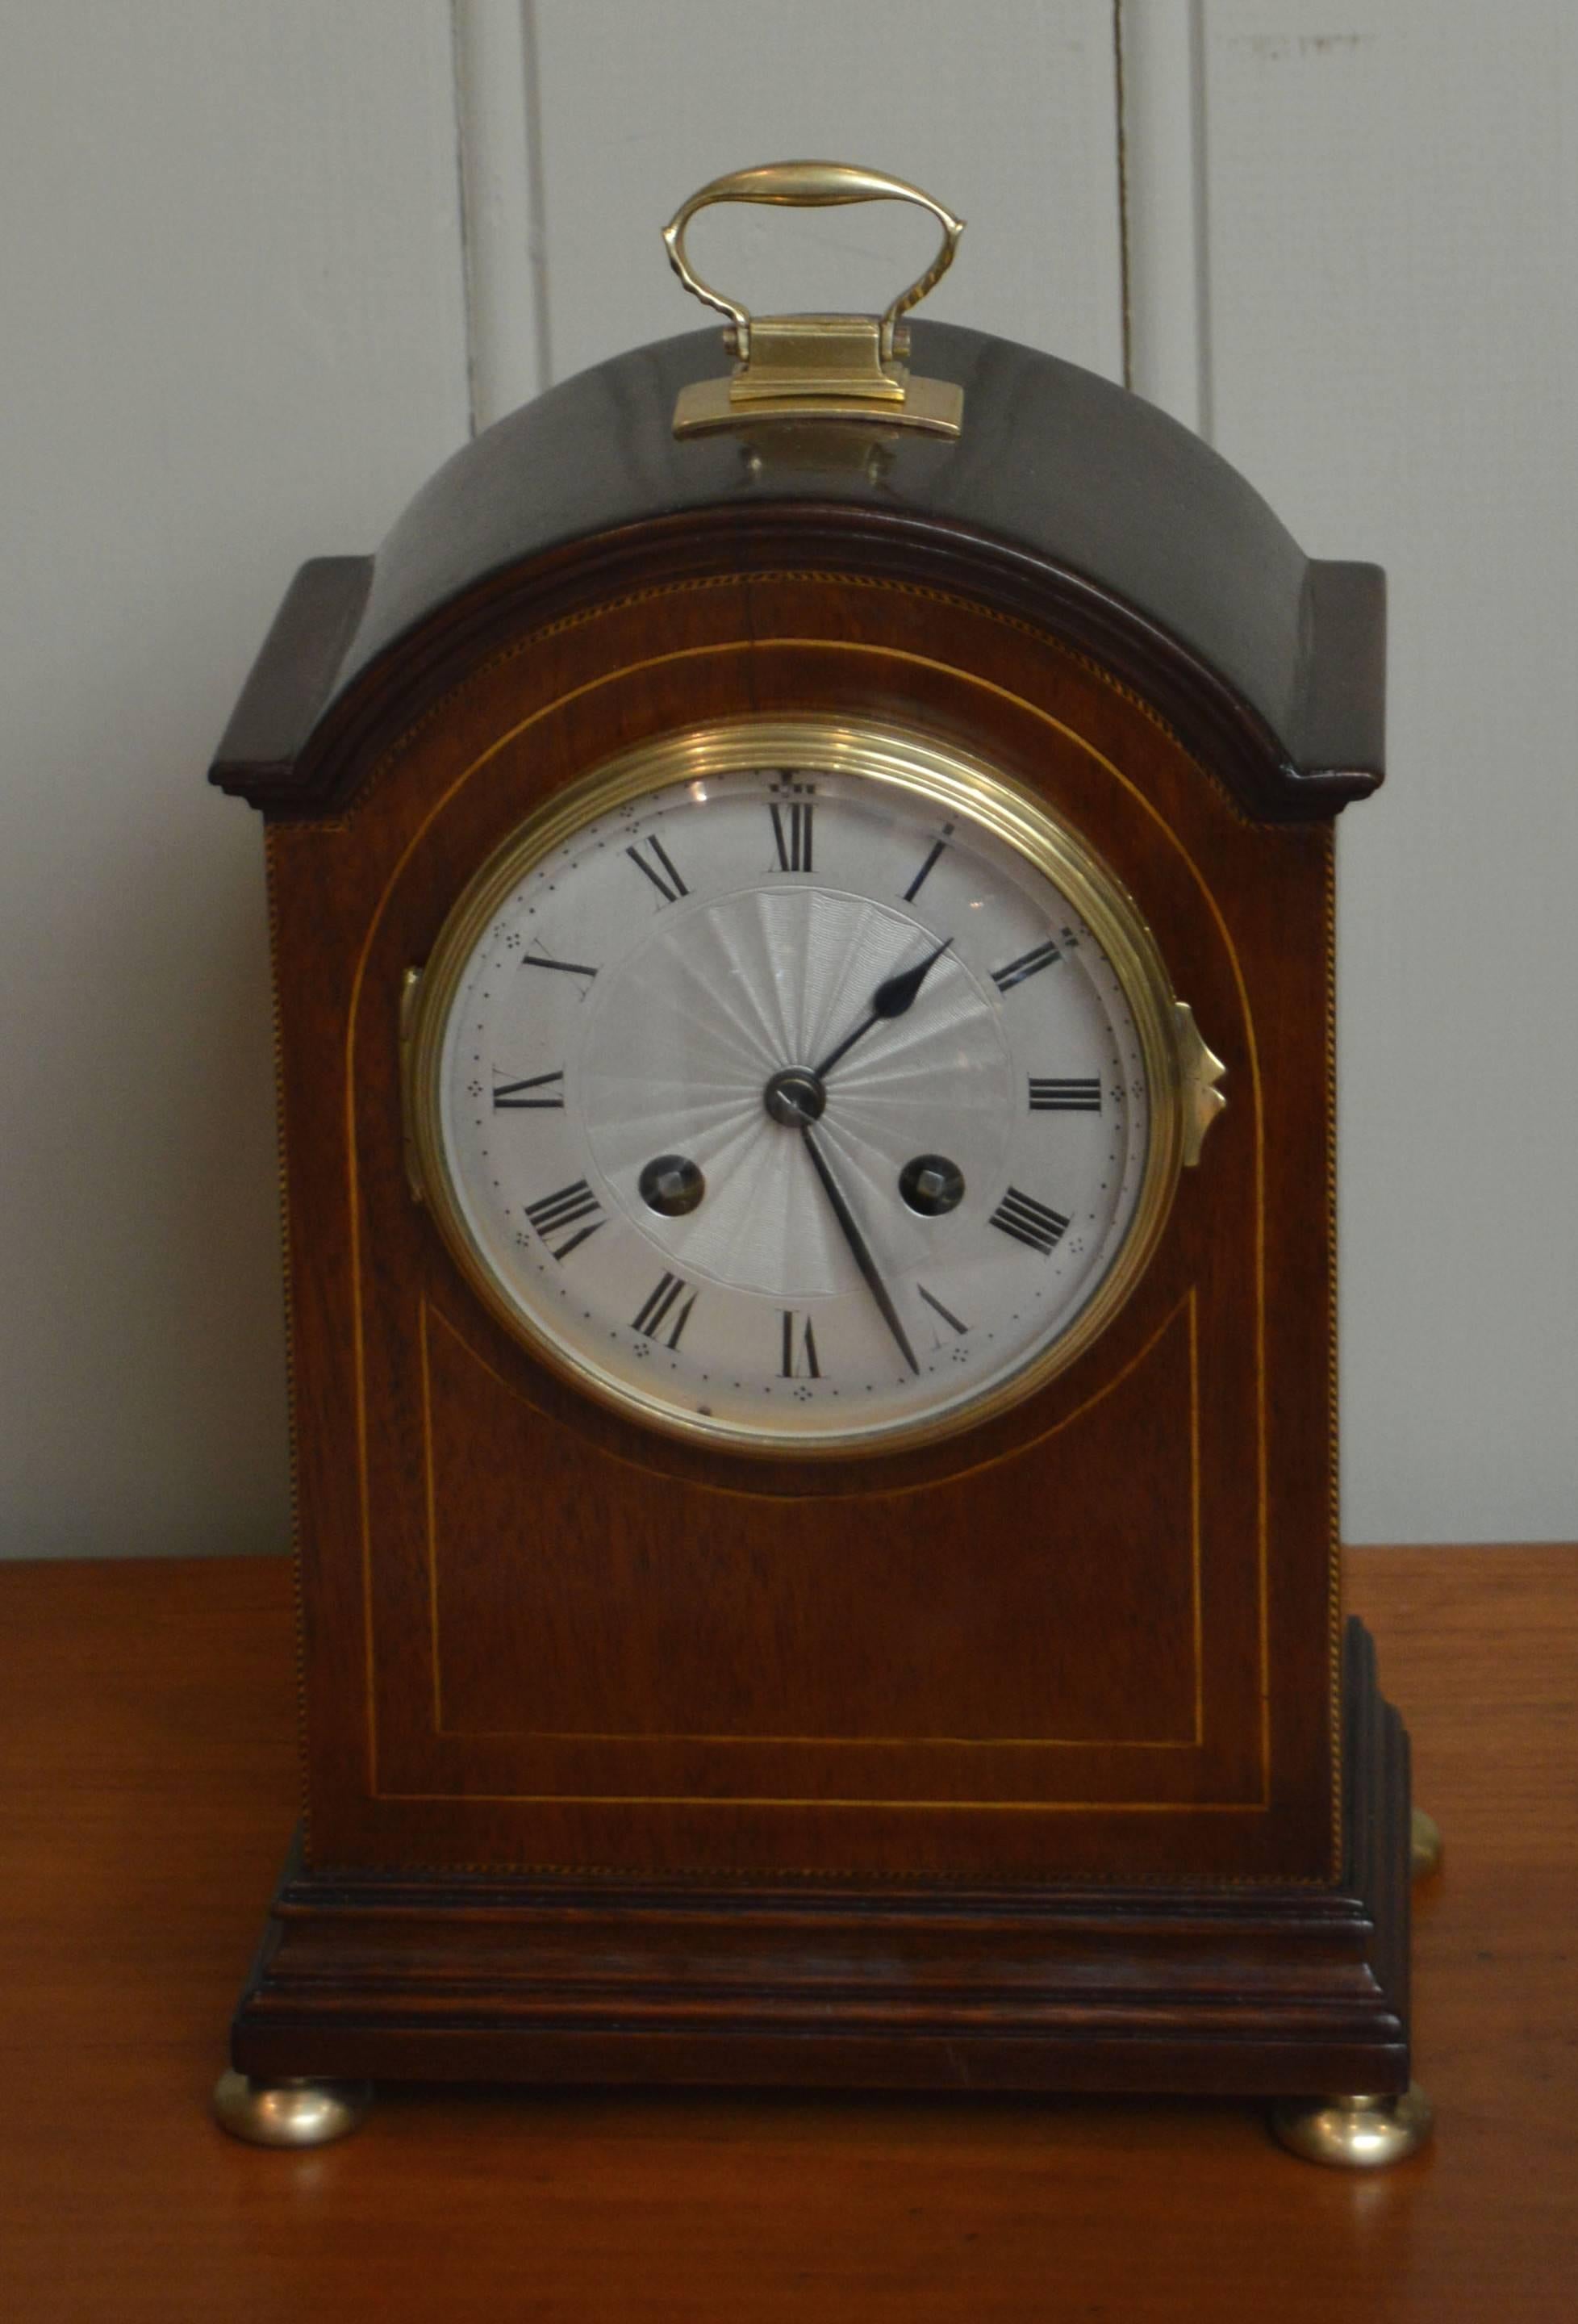 A mahogany mantel clock in the style of an English bracket clock, dating to the Edwardian period, circa 1910. It has a dome top with a brass carrying handle. The front panel has boxwood stringing and a convex glass with a silvered engine turned